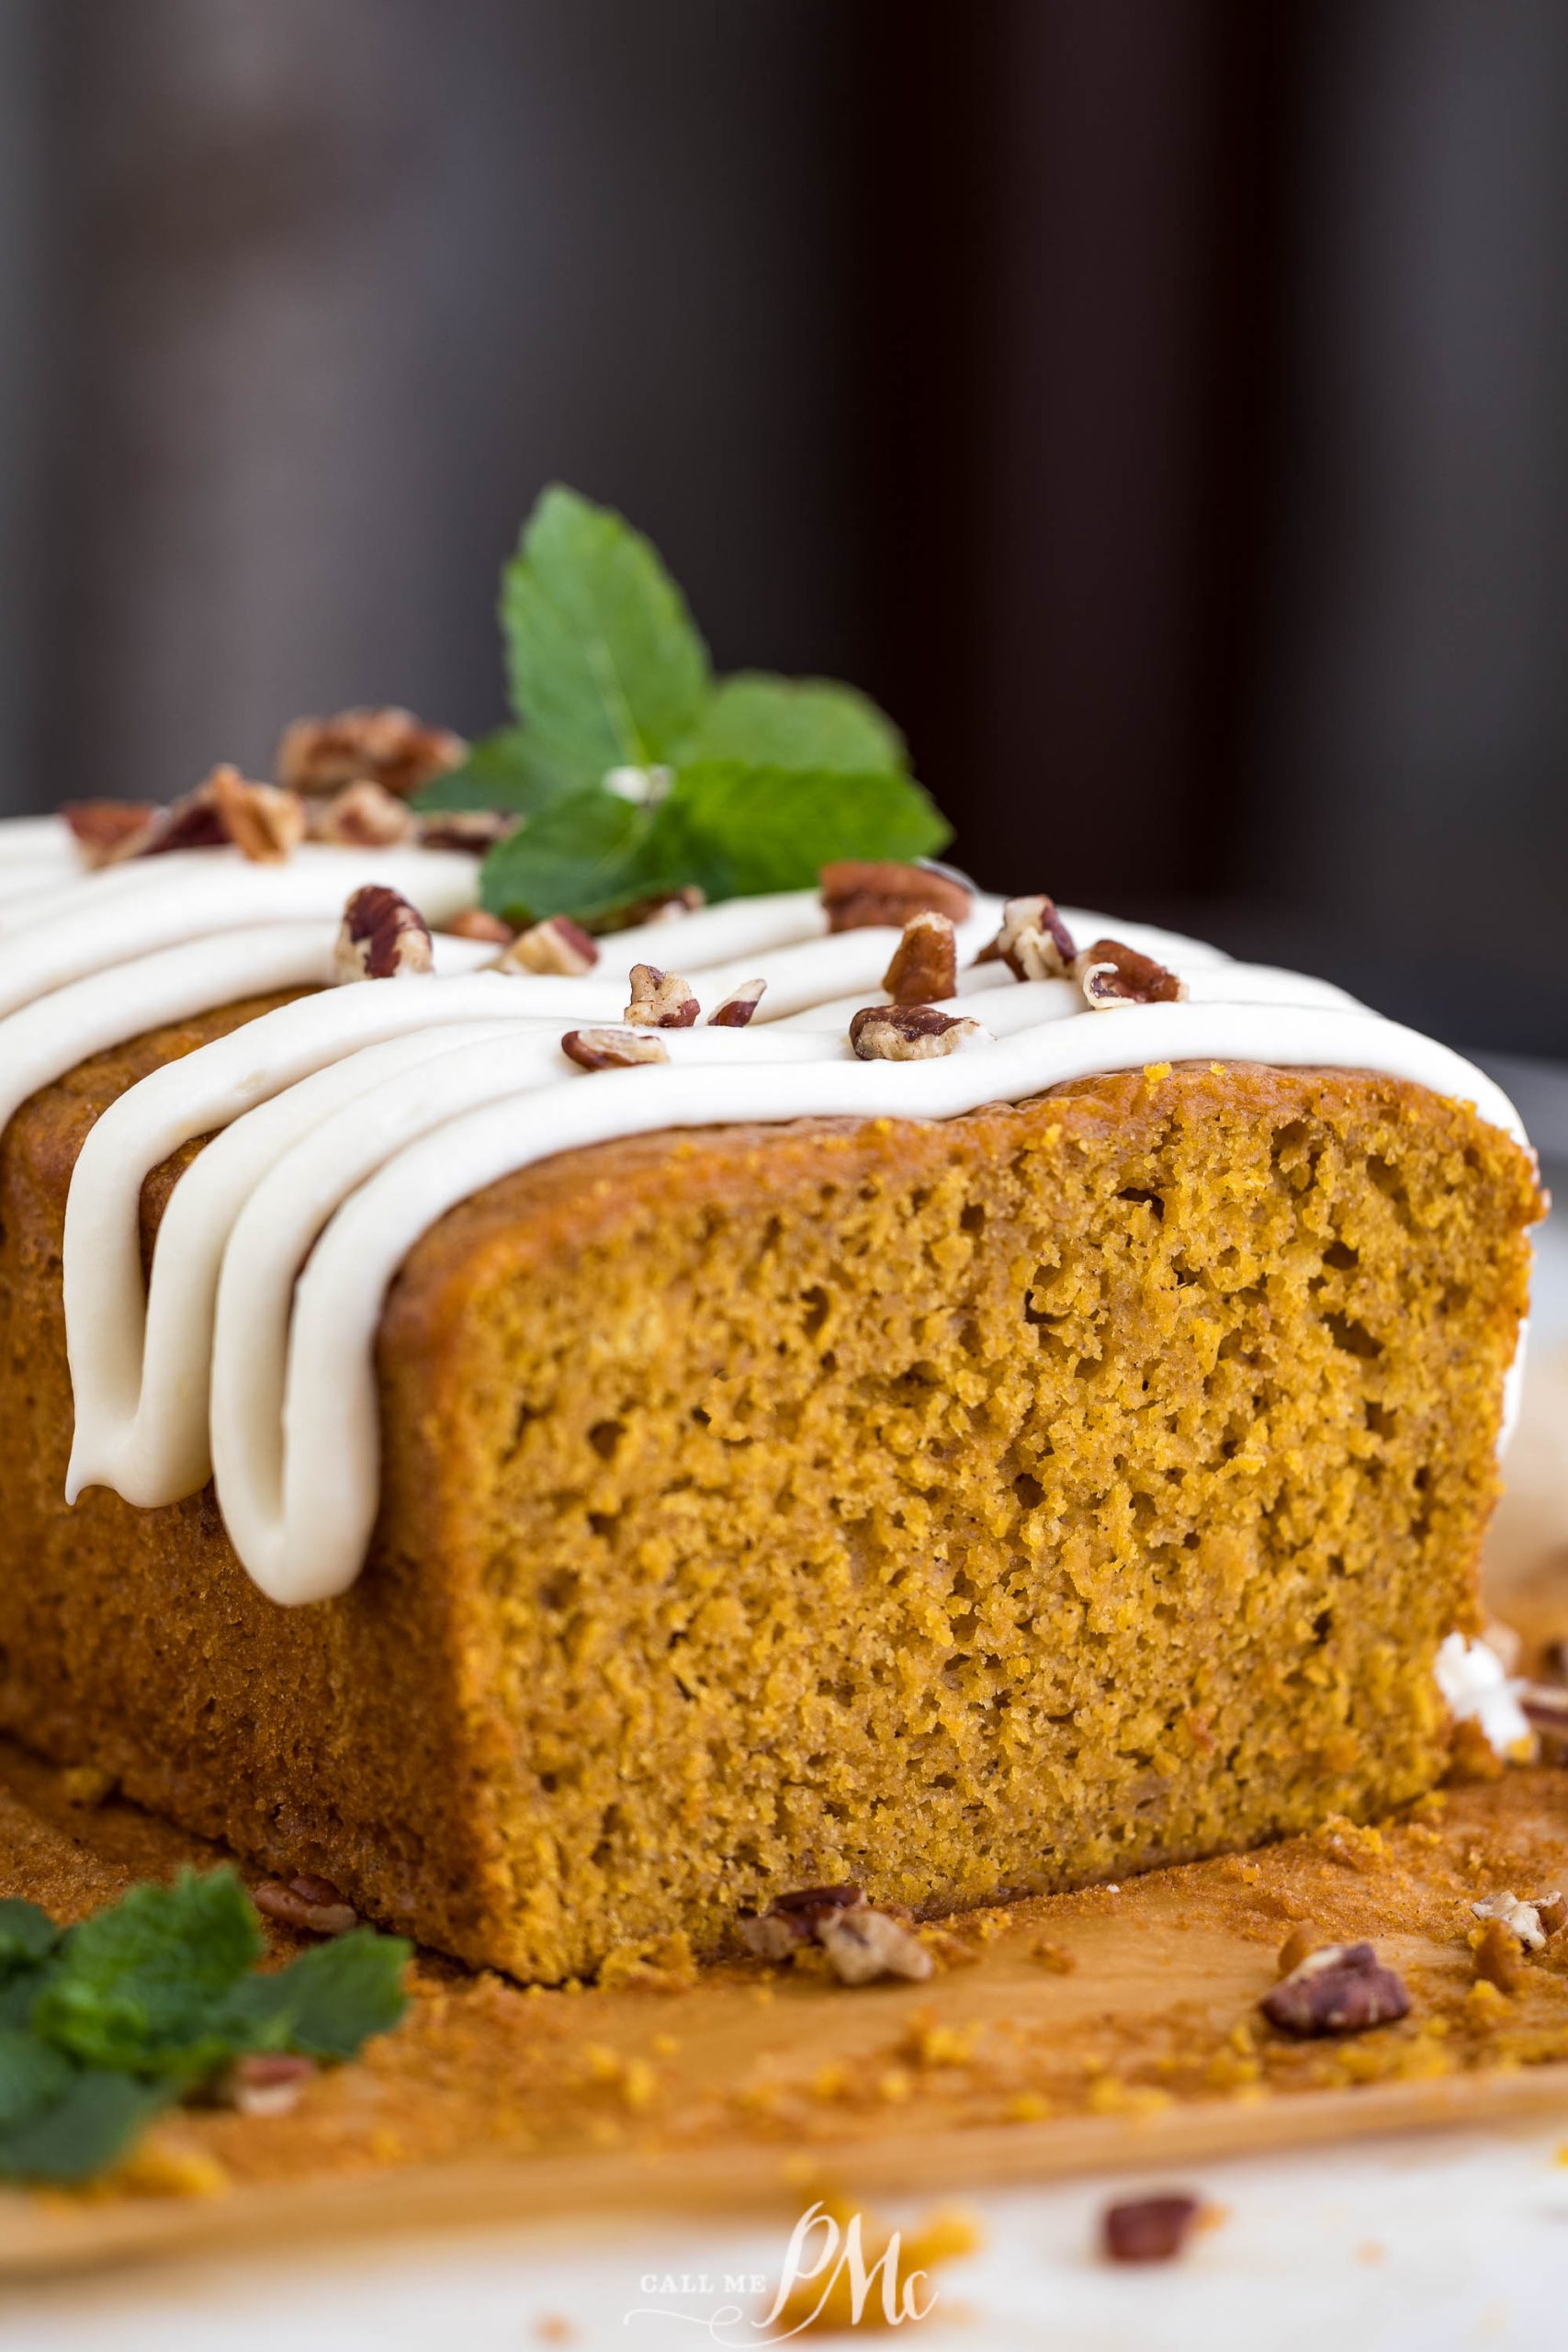 A slice of Pumpkin Loaf with Cream Cheese Glaze with mint leaves